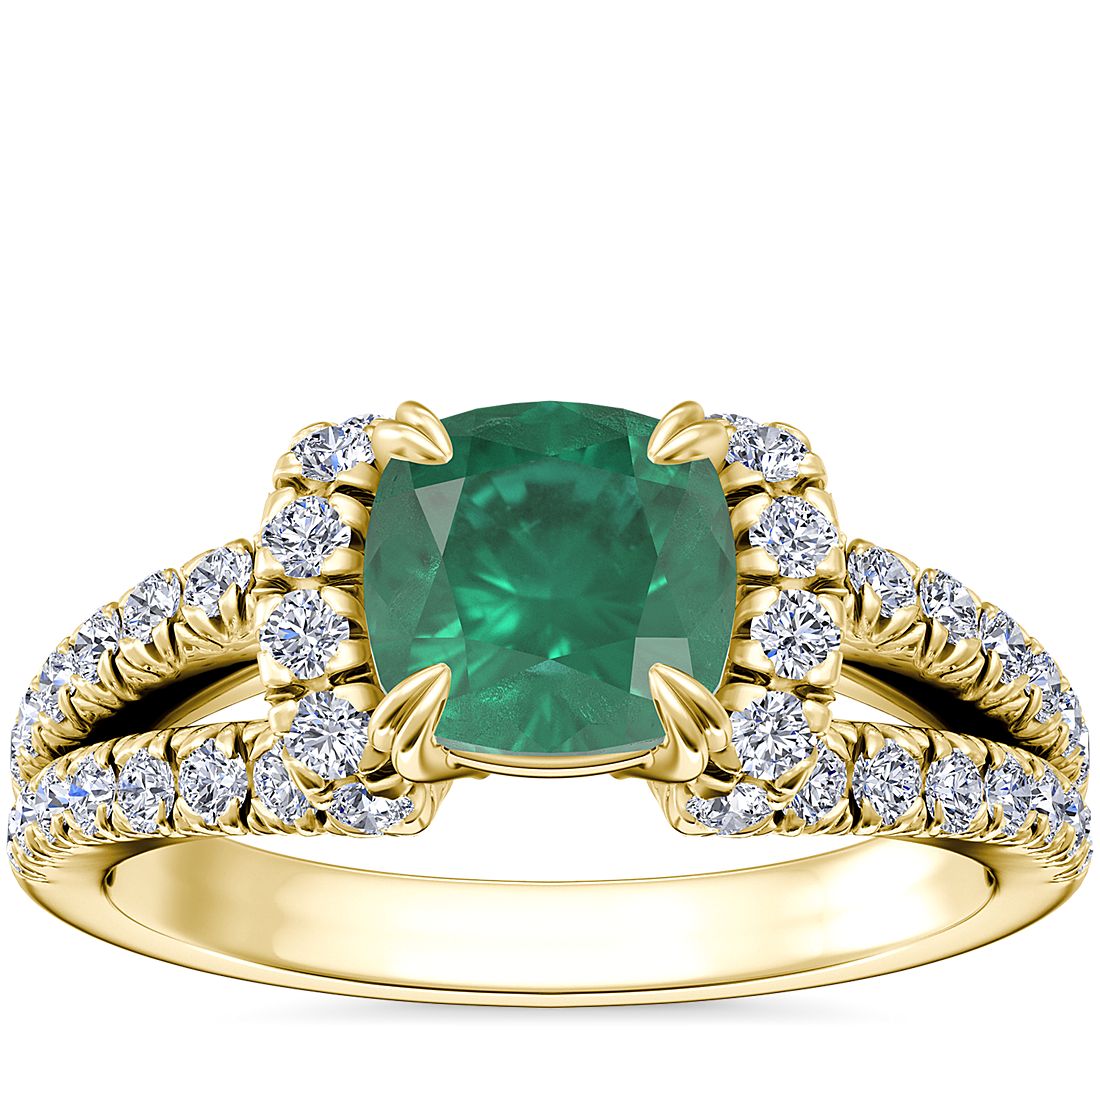 Split Semi Halo Diamond Engagement Ring with Cushion Emerald in 14k Yellow Gold (6.5mm)